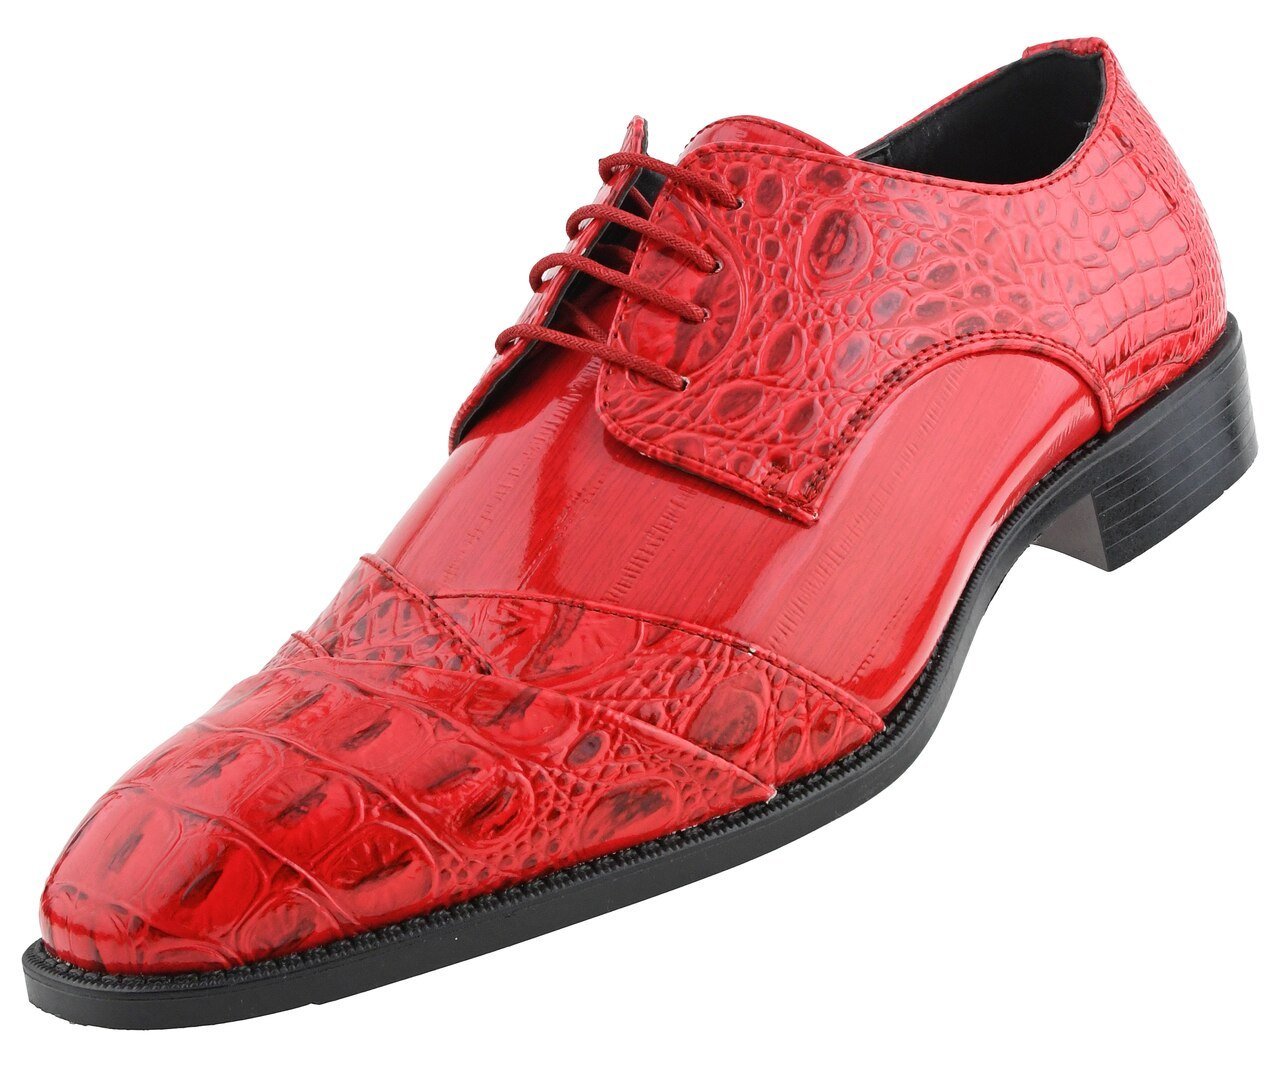 Men Dress Shoes-Alligator-Red | Church suits for less